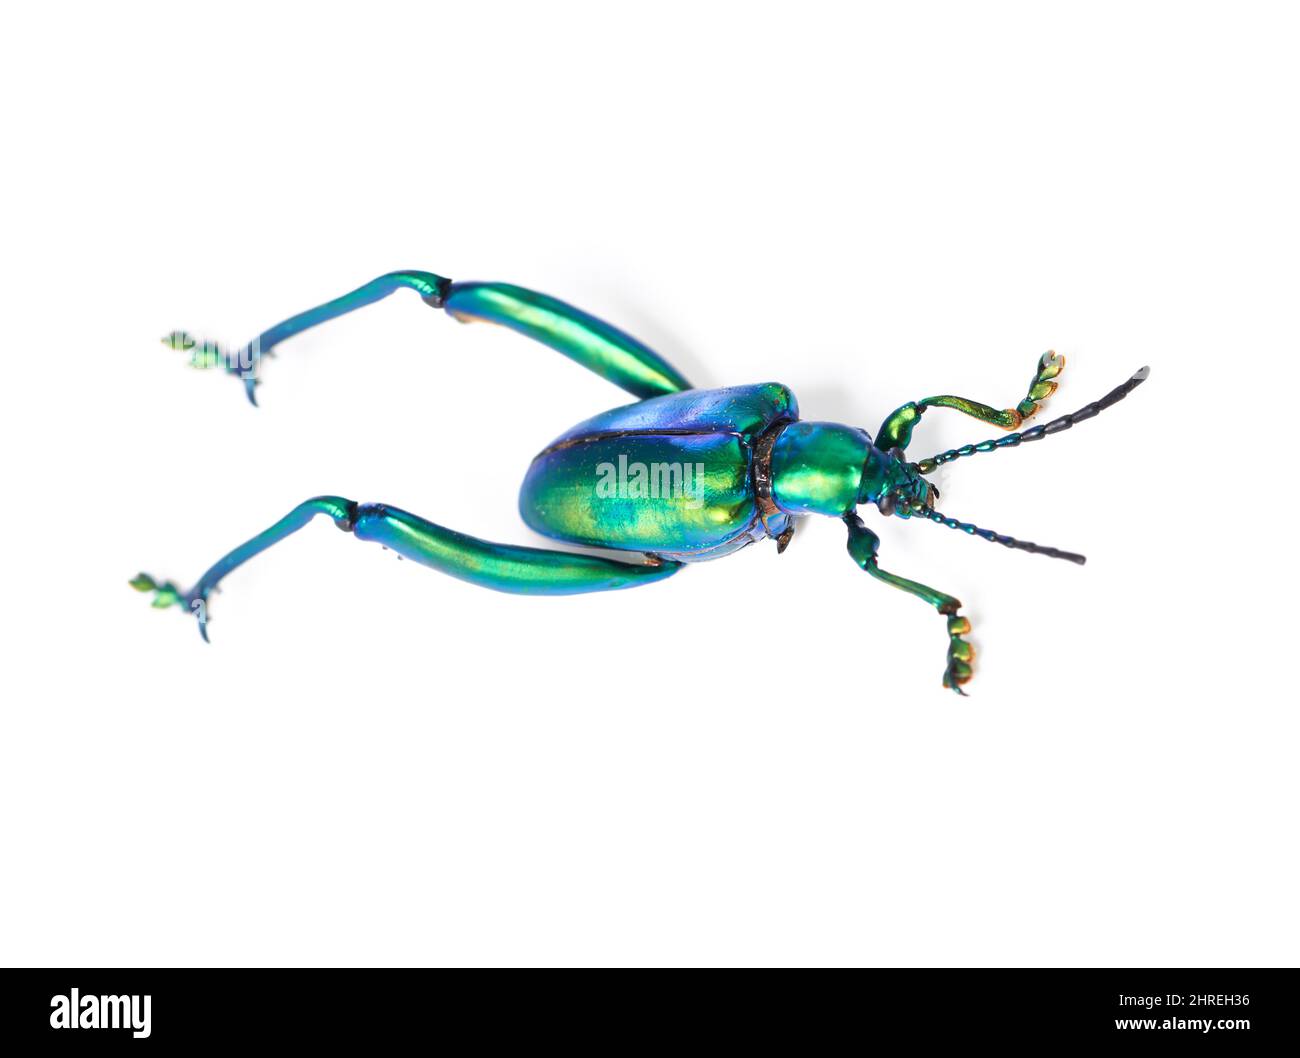 Legs for leaping. Closeup shot of beetle. Stock Photo